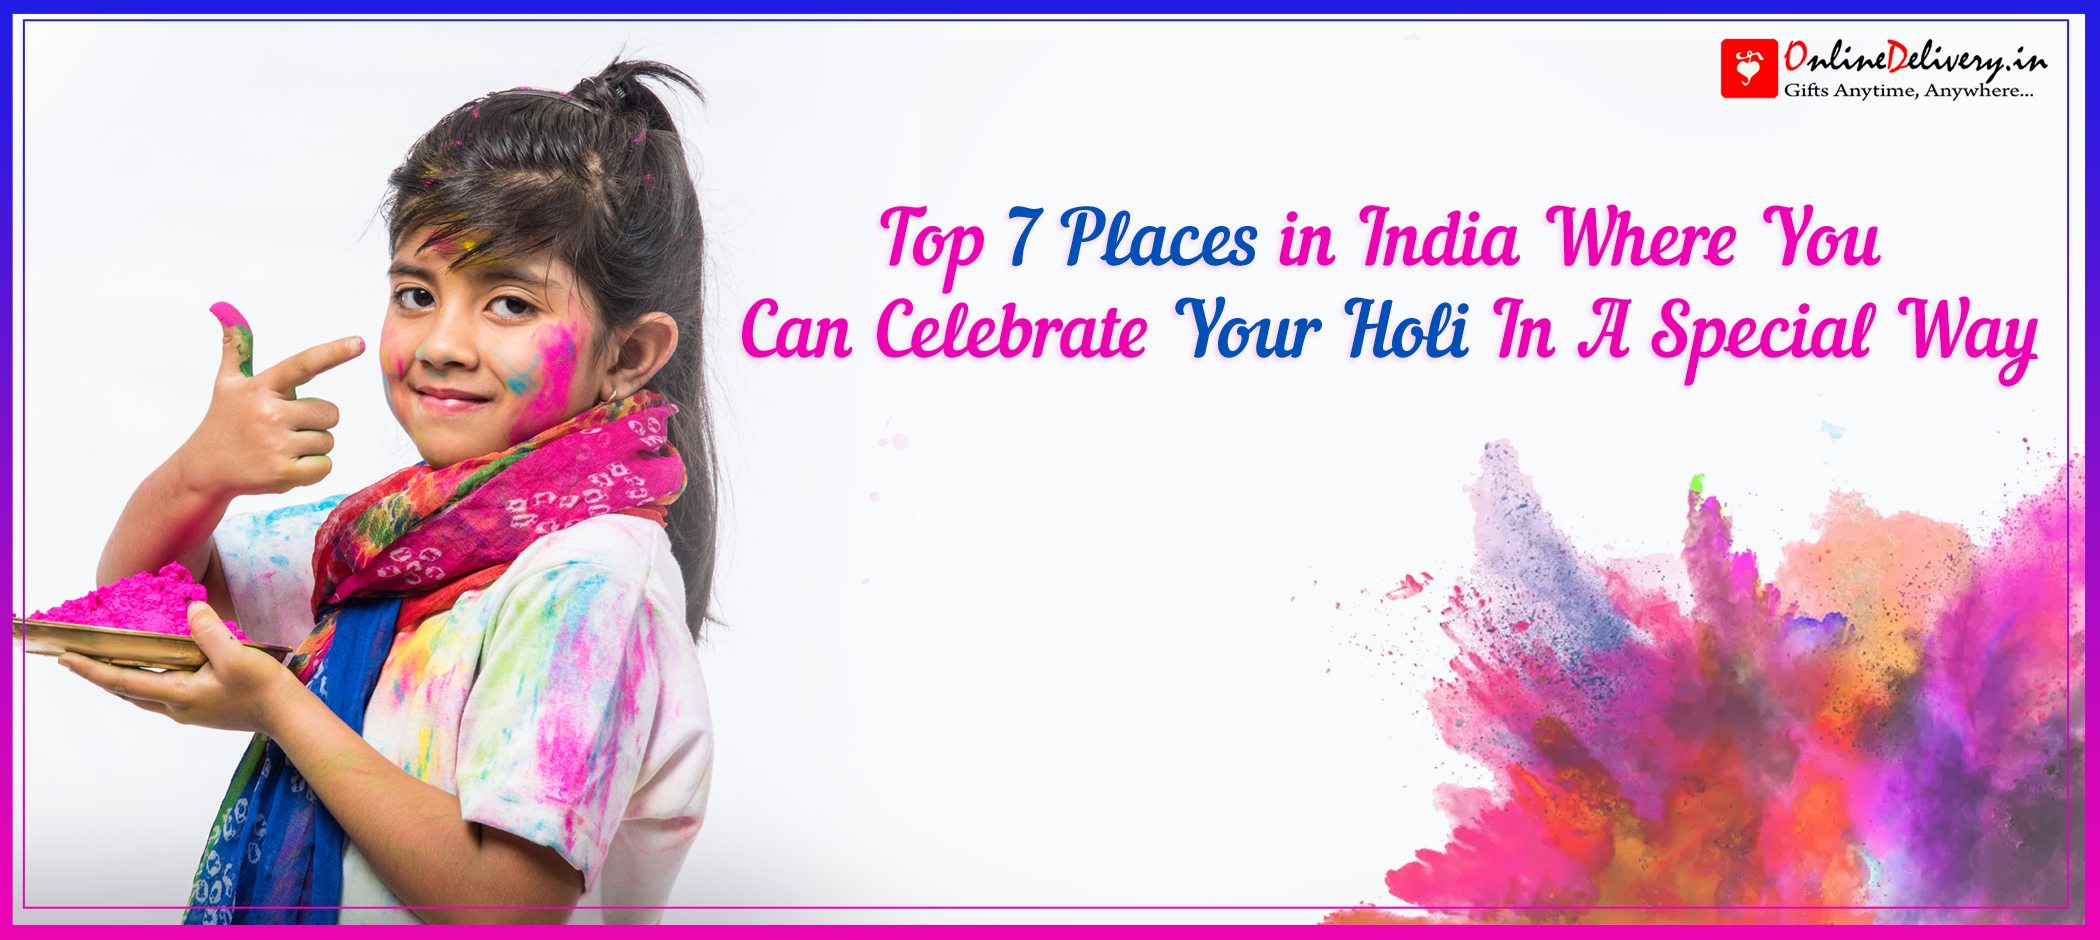 Top 7 Places in India Where You Can Celebrate Your Holi In A Special Way